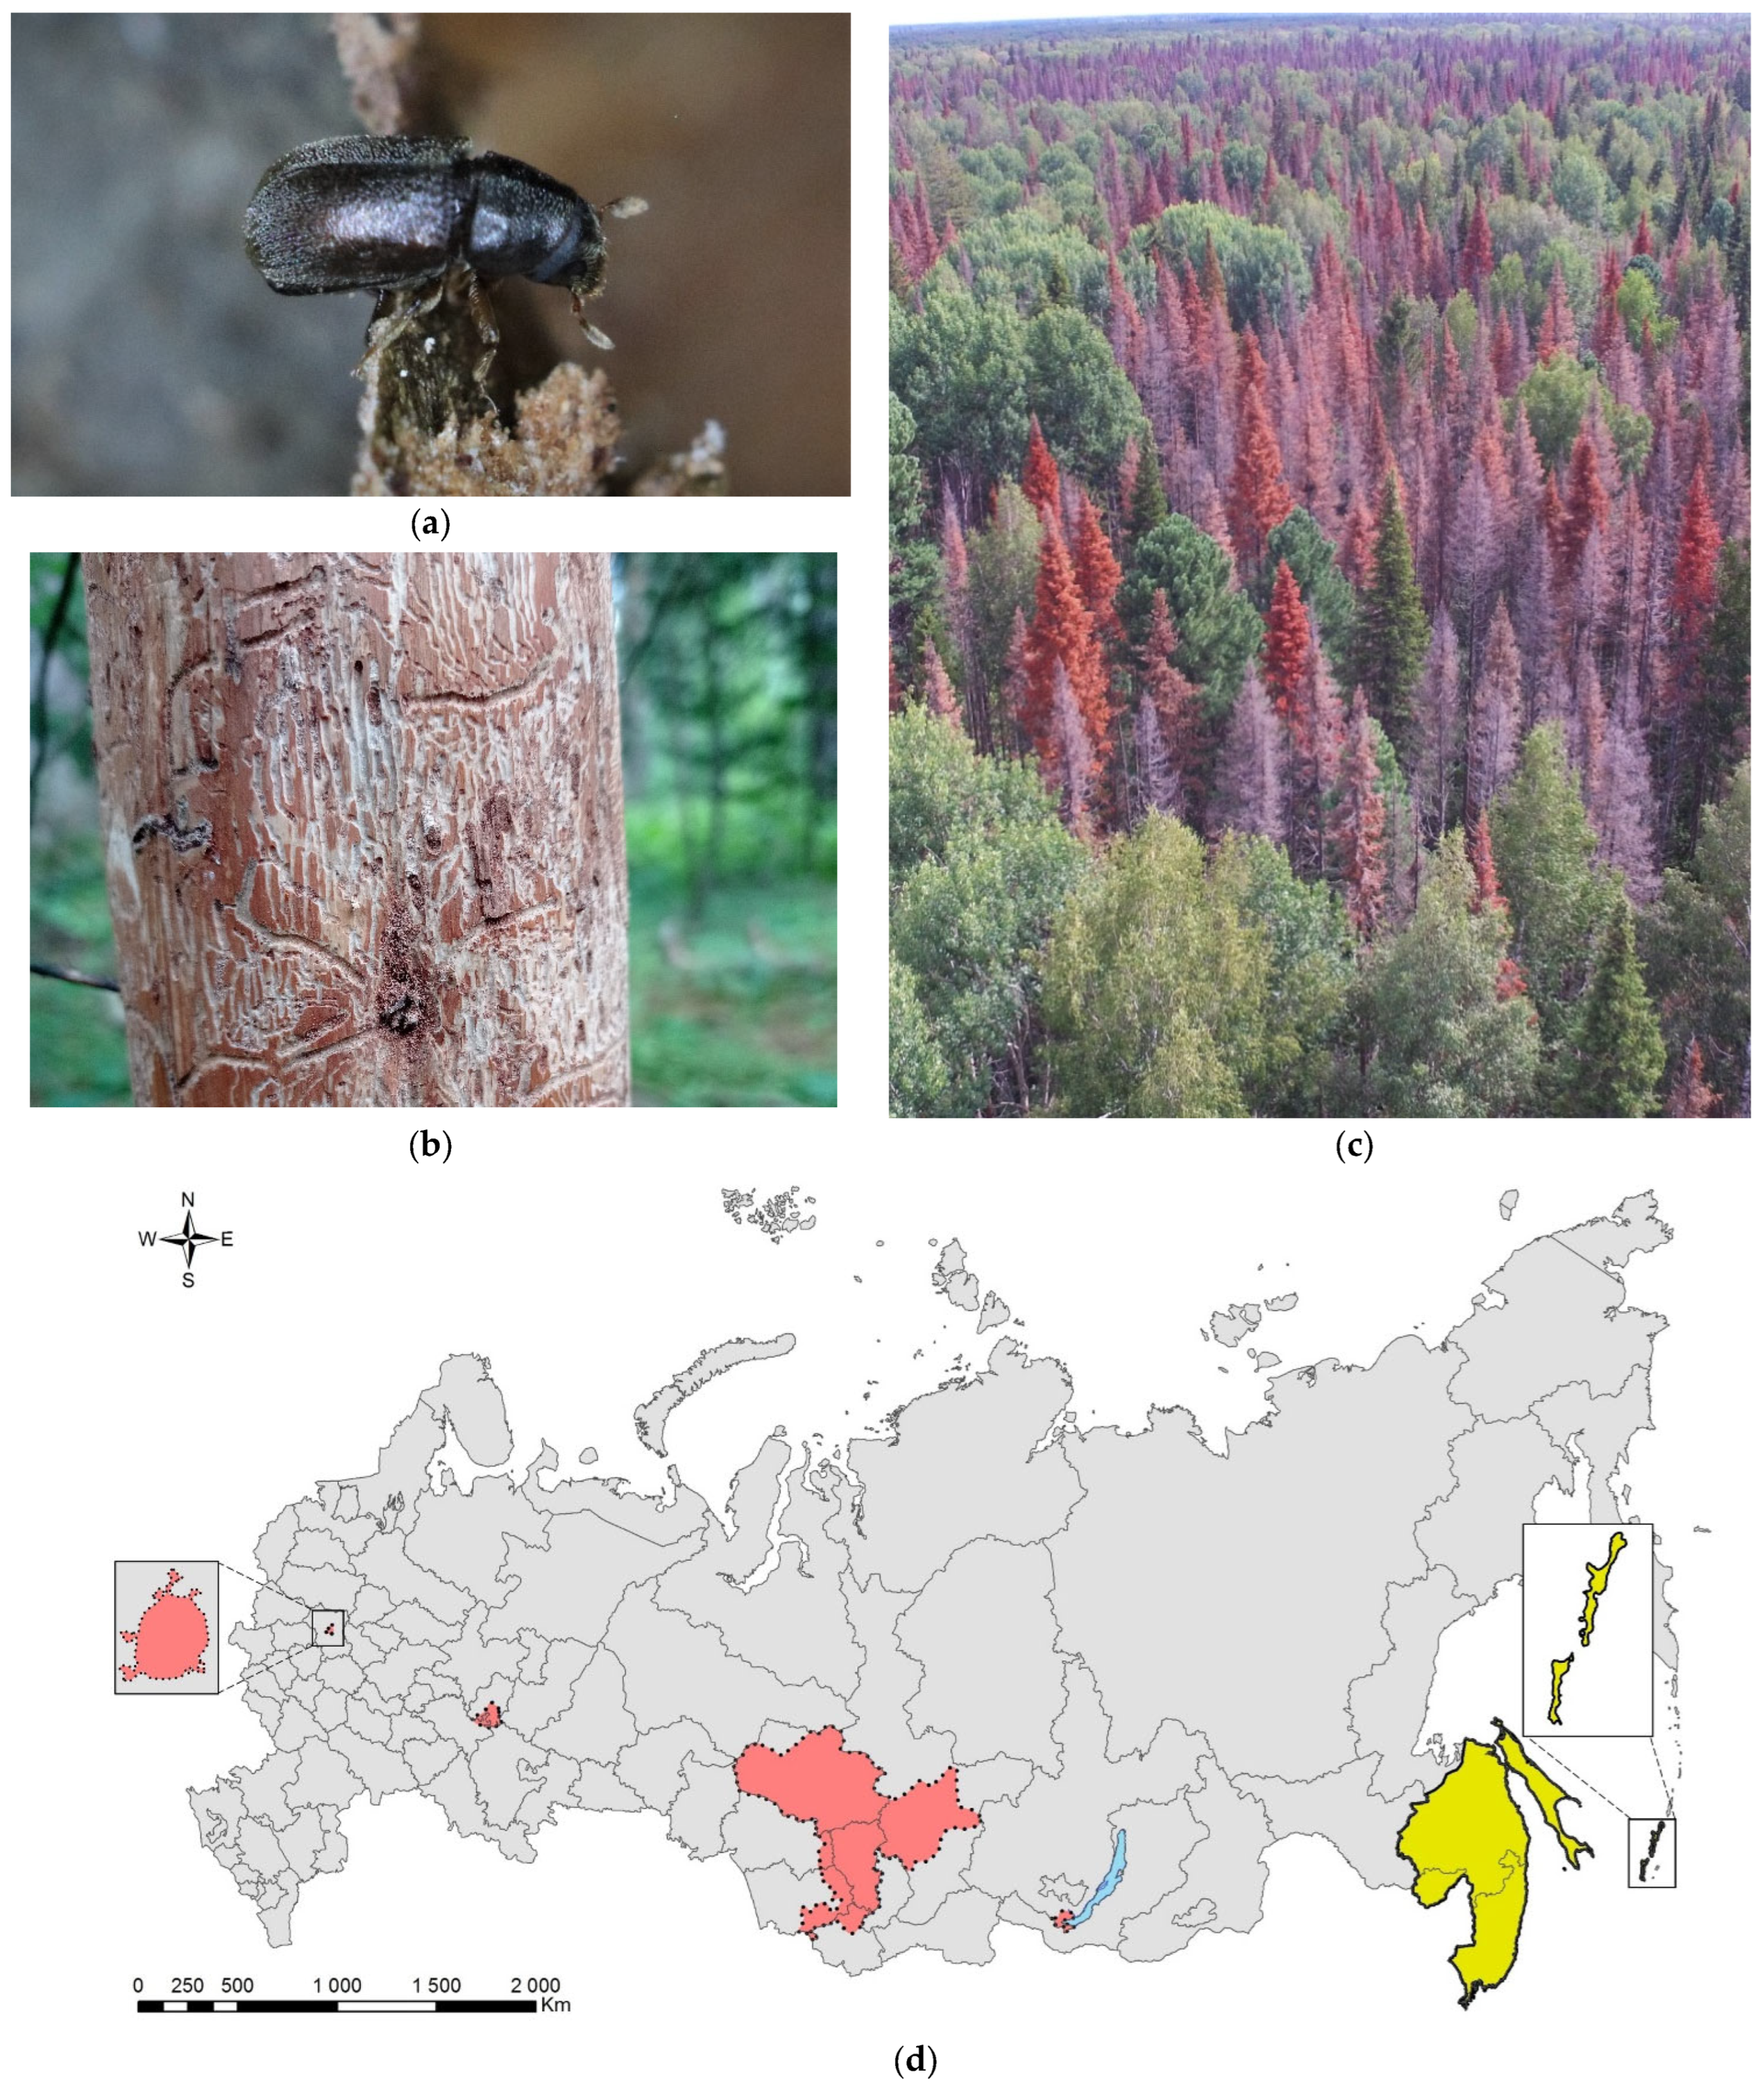 Forests | Free Full-Text | Invasive Insect Pests of Forests and Urban Trees  in Russia: Origin, Pathways, Damage, and Management | HTML